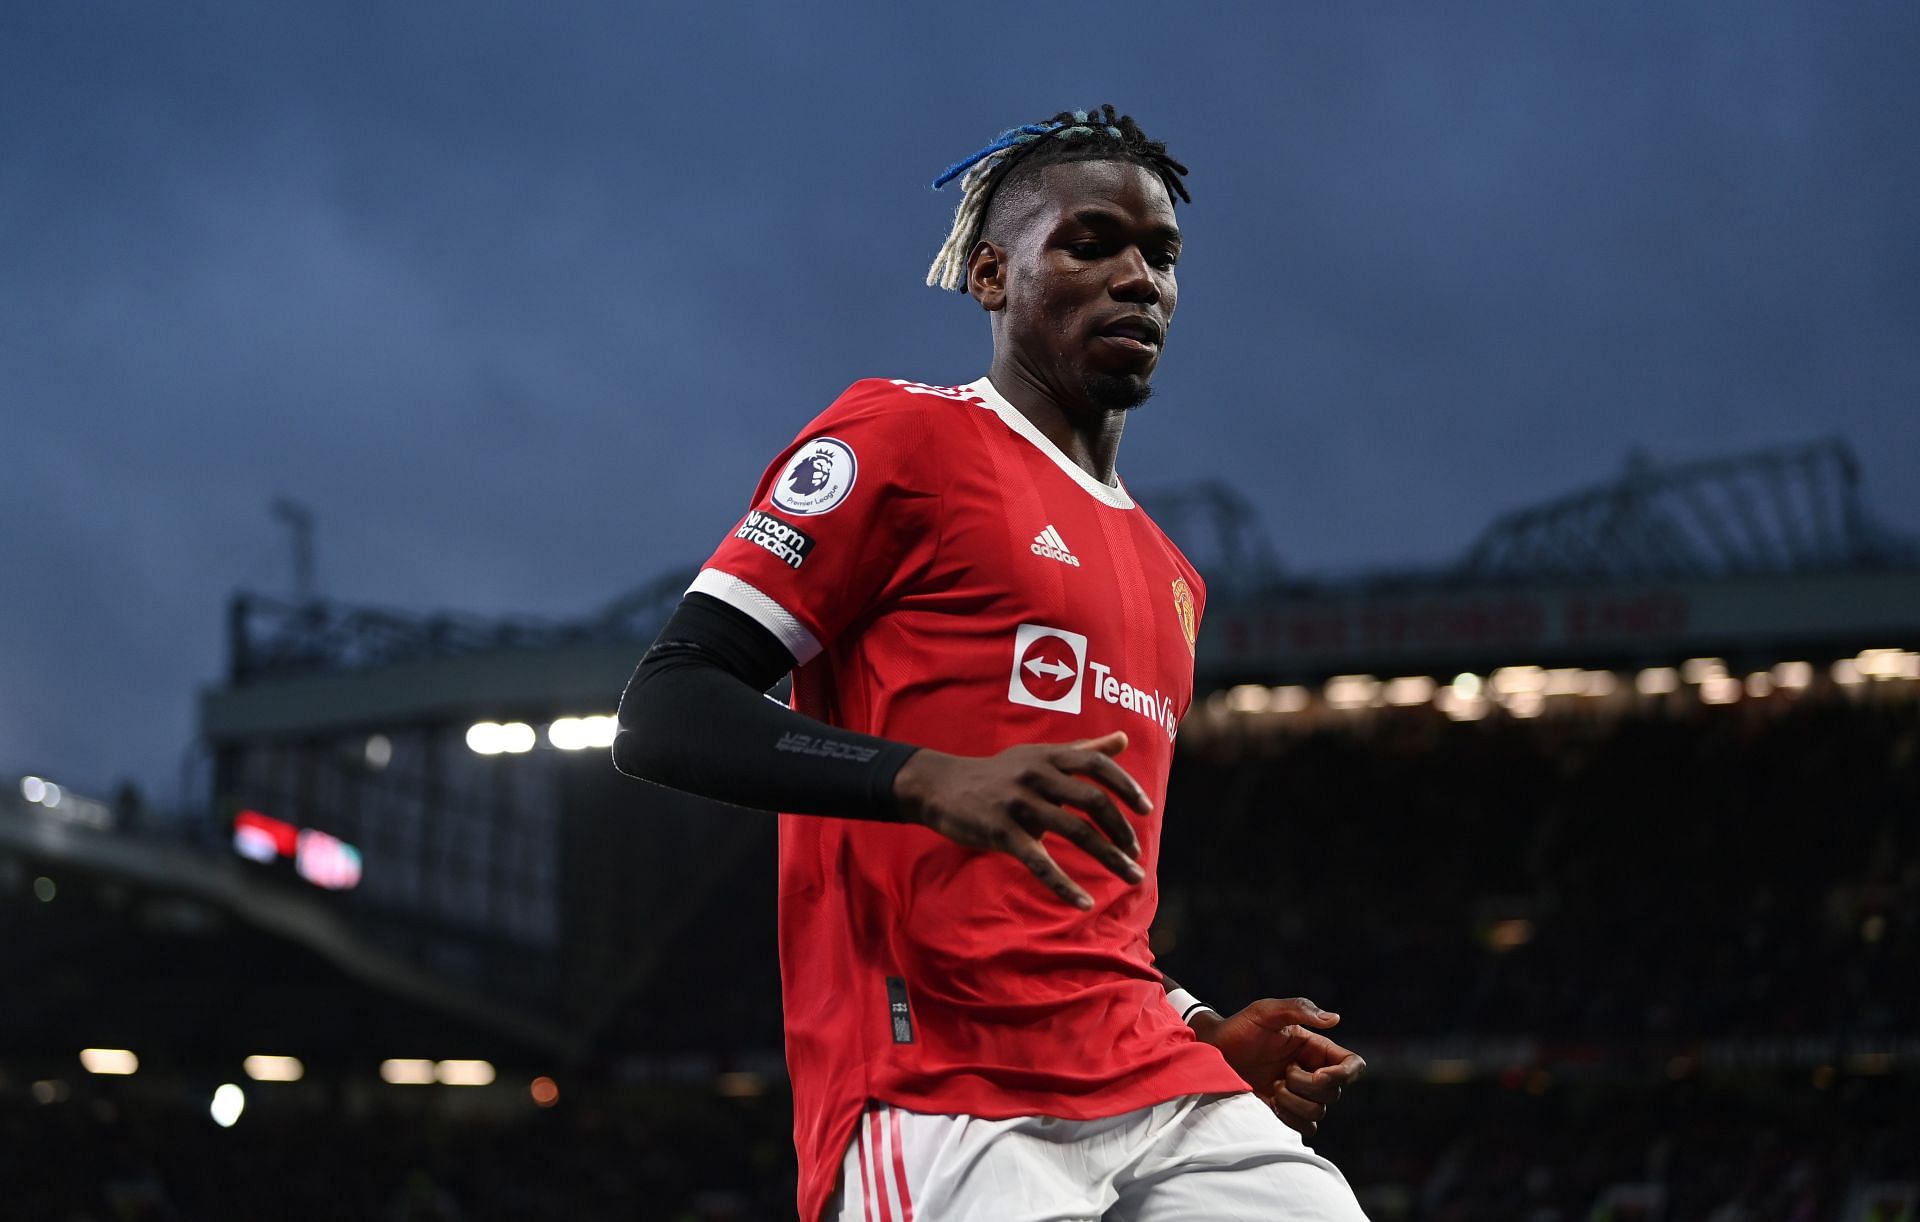 Mino Raiola has hinted that Paul Pogba&rsquo;s time at Manchester United could be coming to an end.